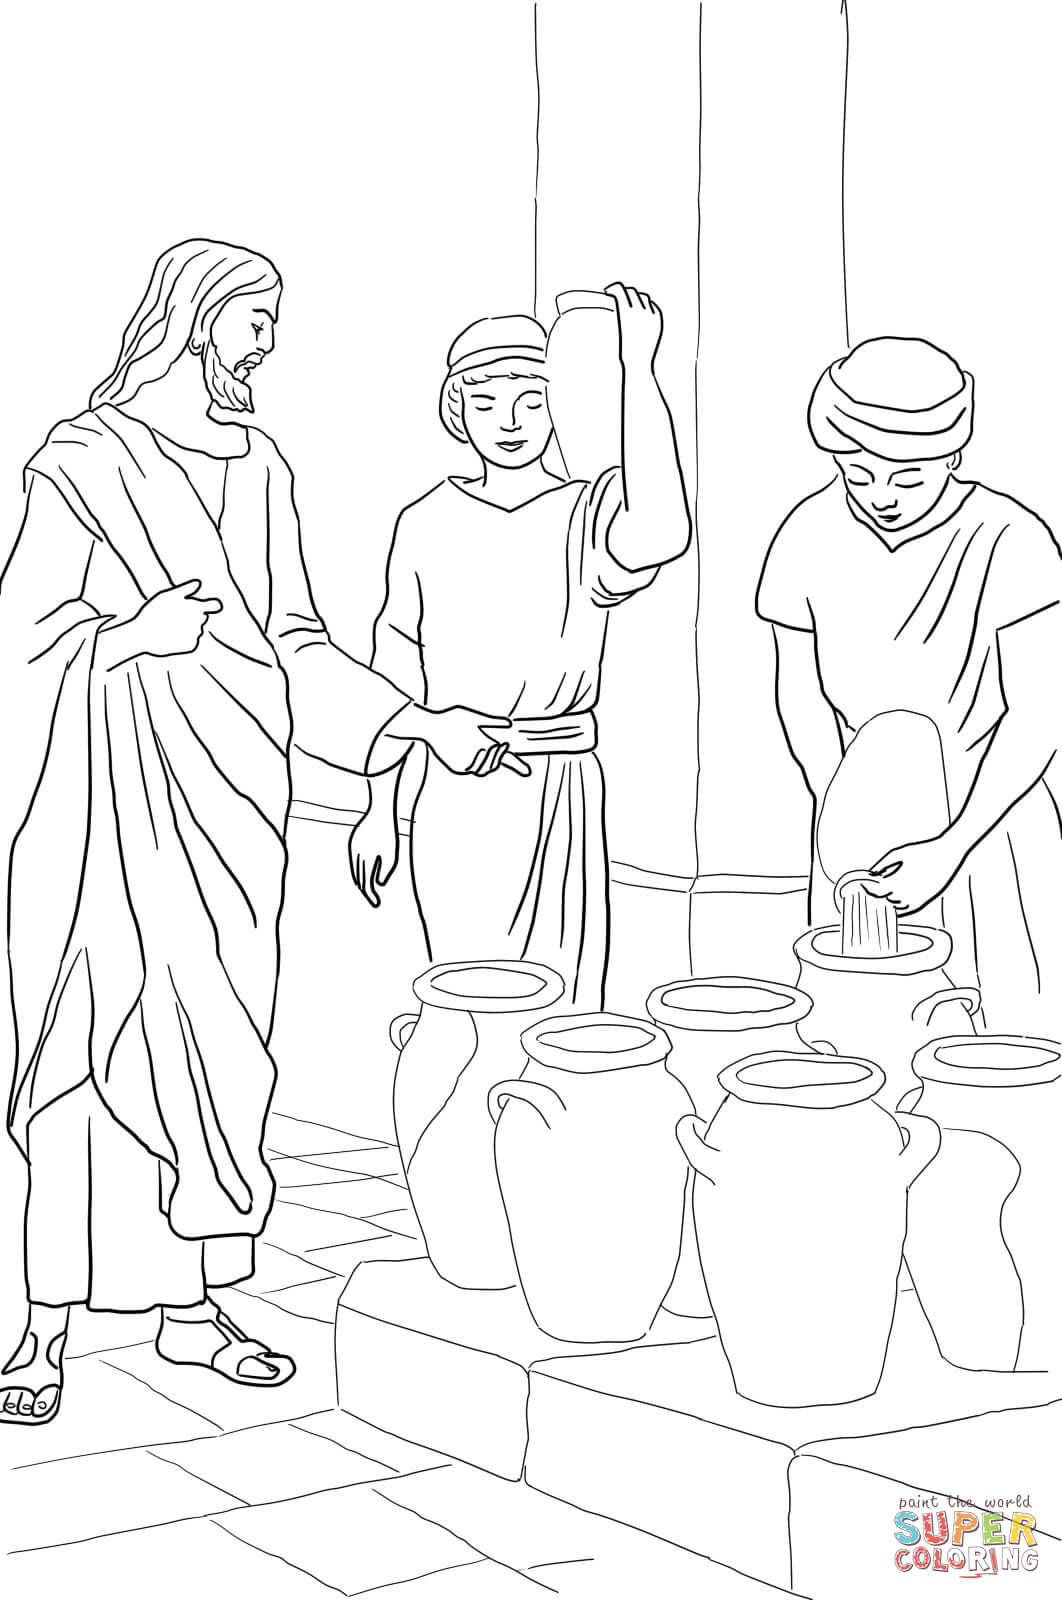 Jesus Turns Water Into Wine Coloring Page